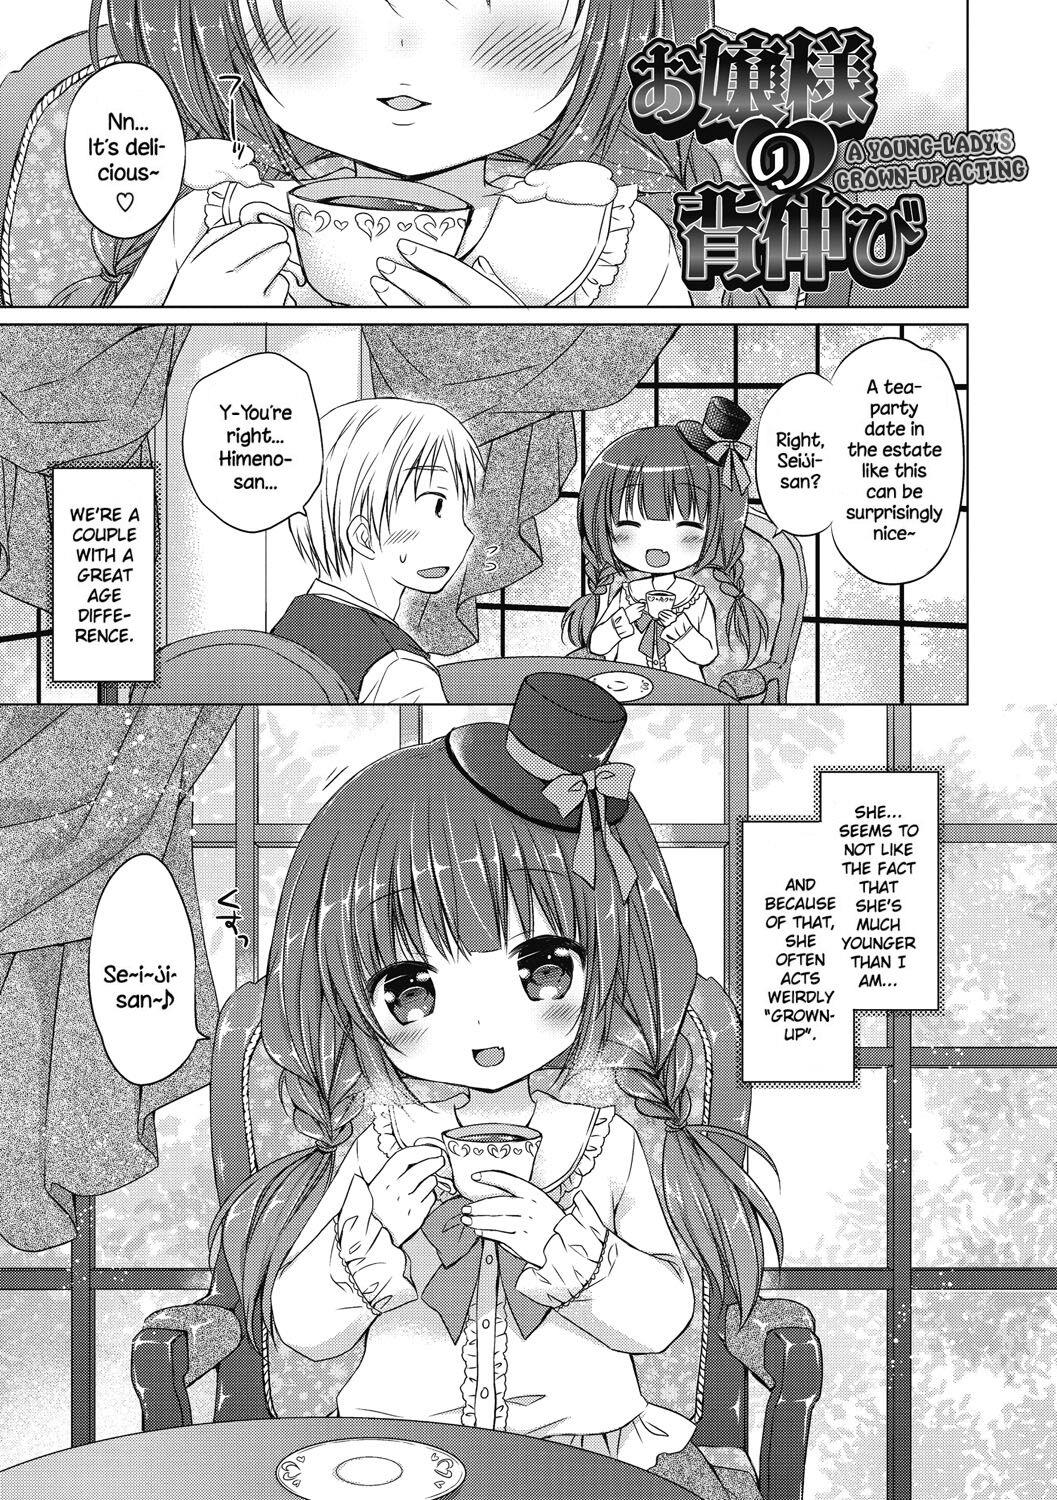 Yoiko To Ikenai Houkago Vol.1 Chapter 9: A Young Lady's Grown-Up Acting - Picture 1